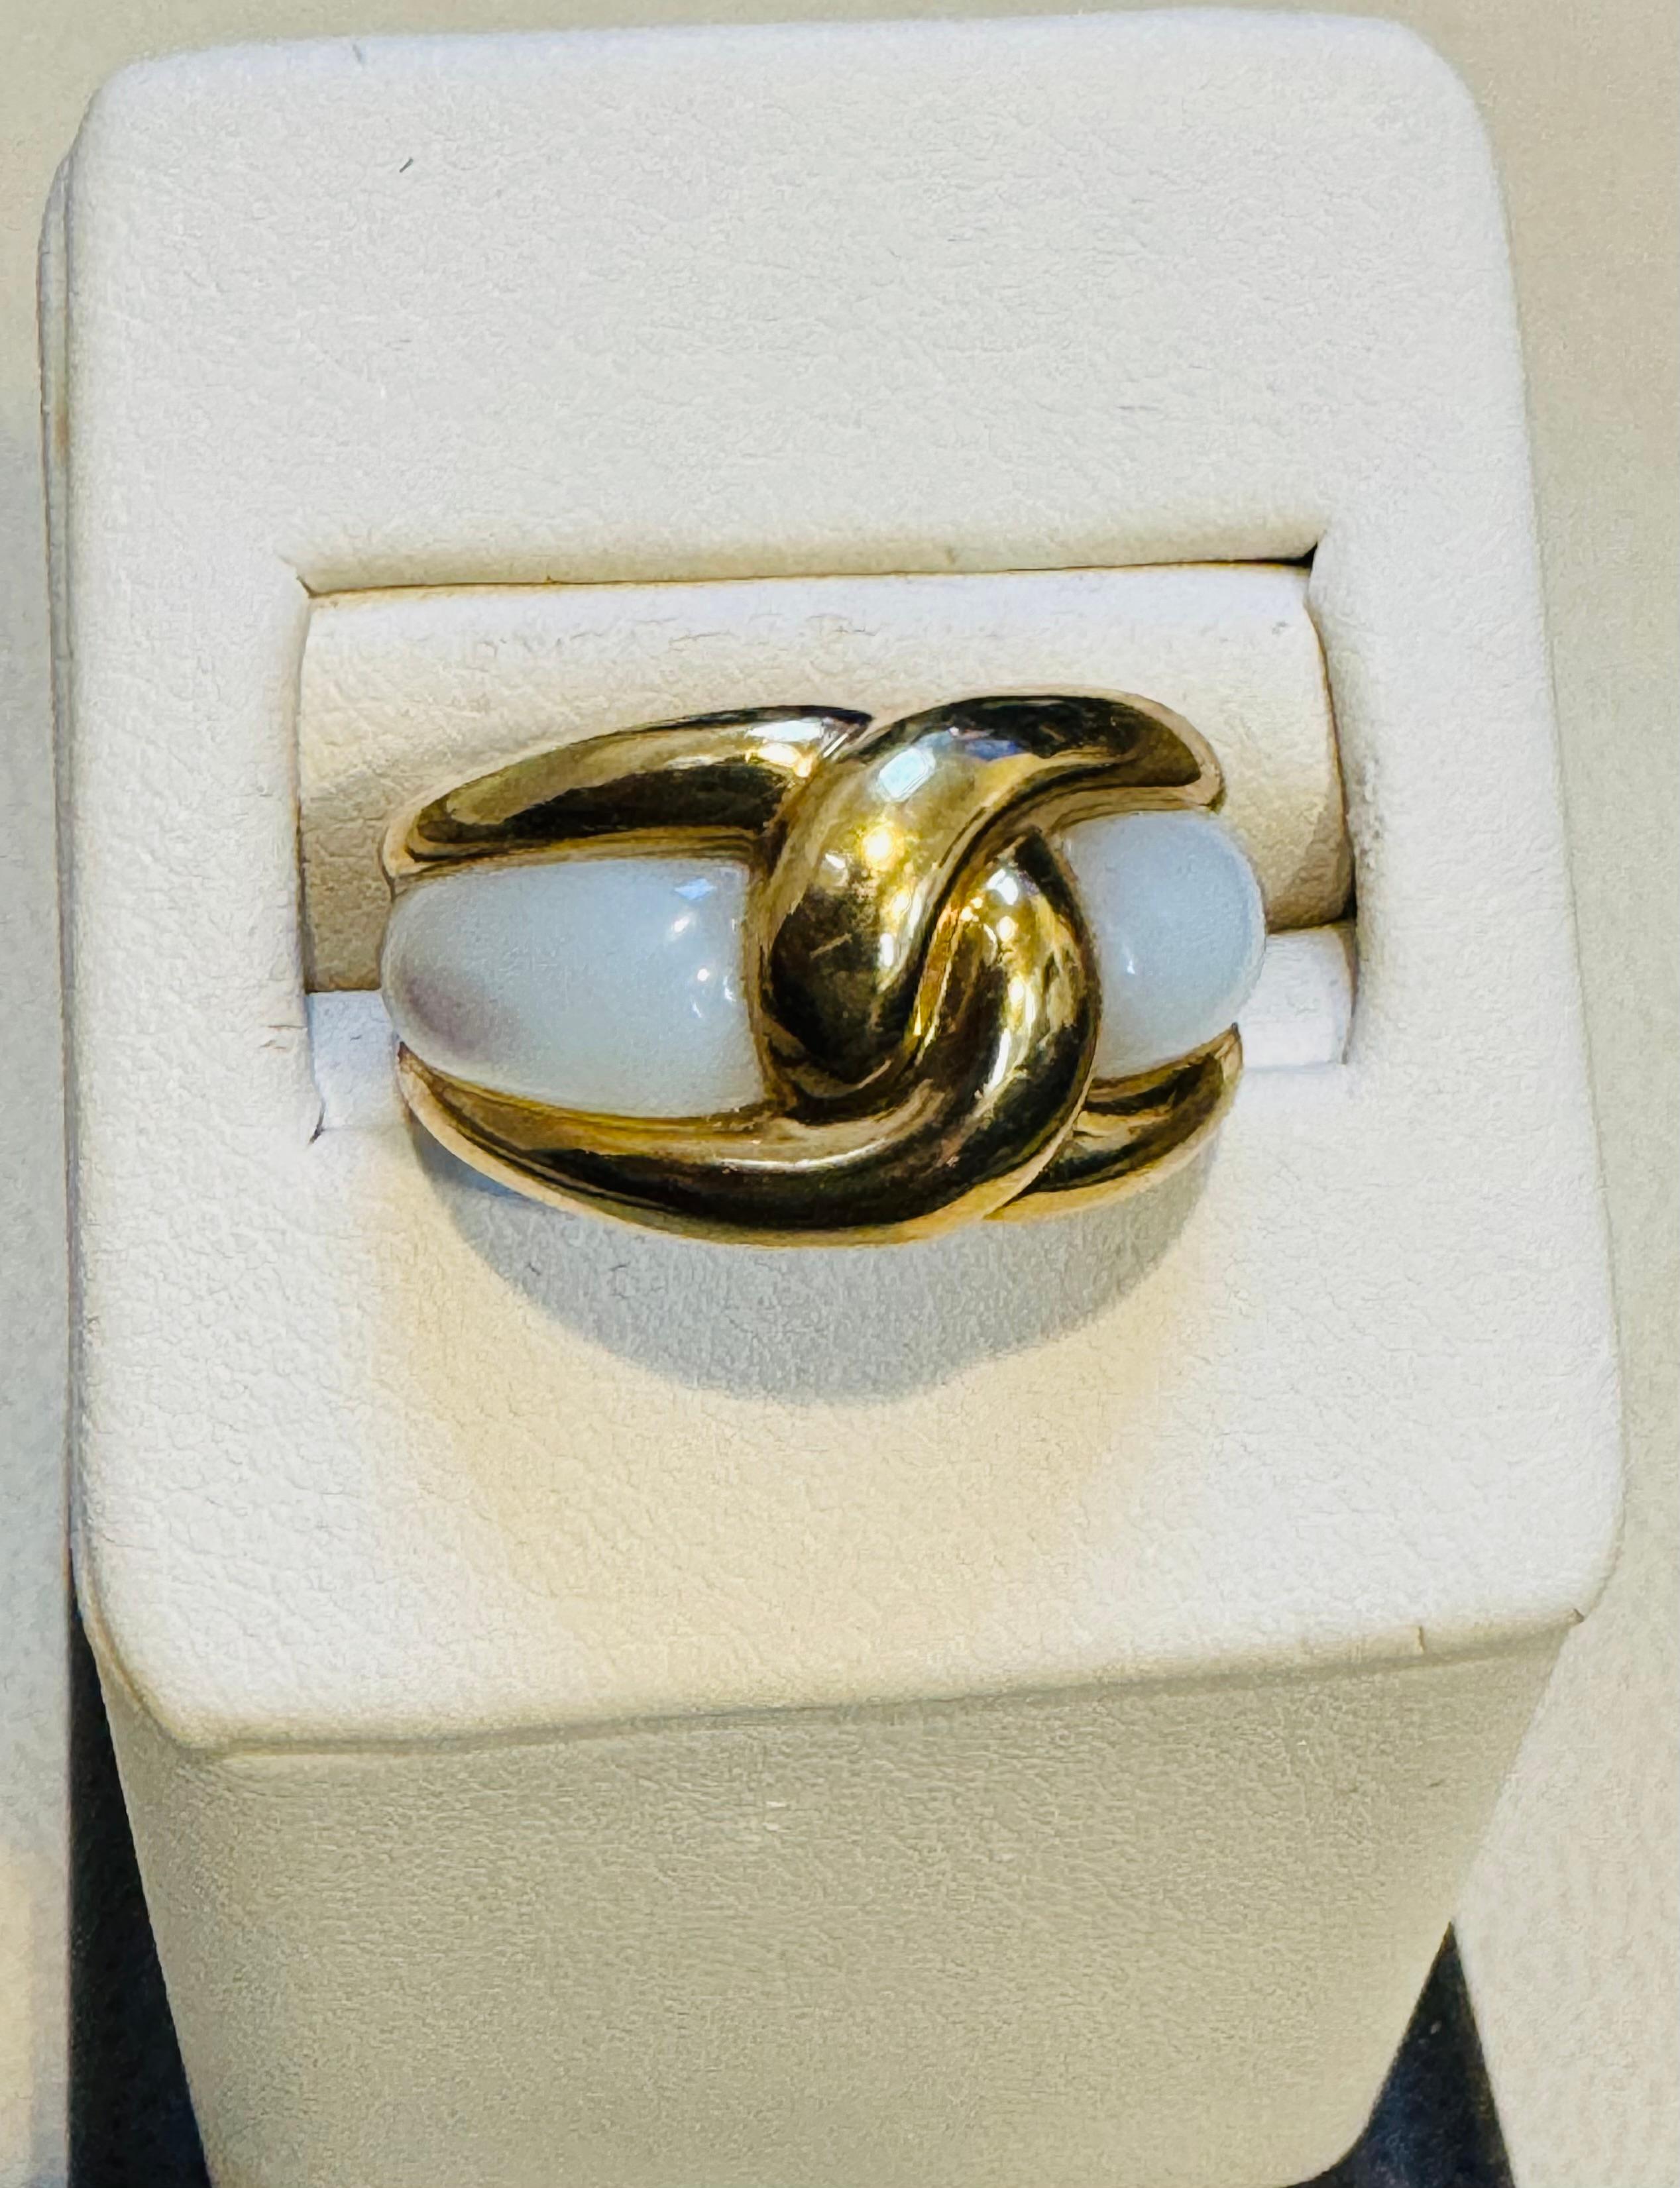 Van Cleef & Arpels Contemporary Mother of pearl “Twisted” Ring 18KY Gold Size5.5 For Sale 3